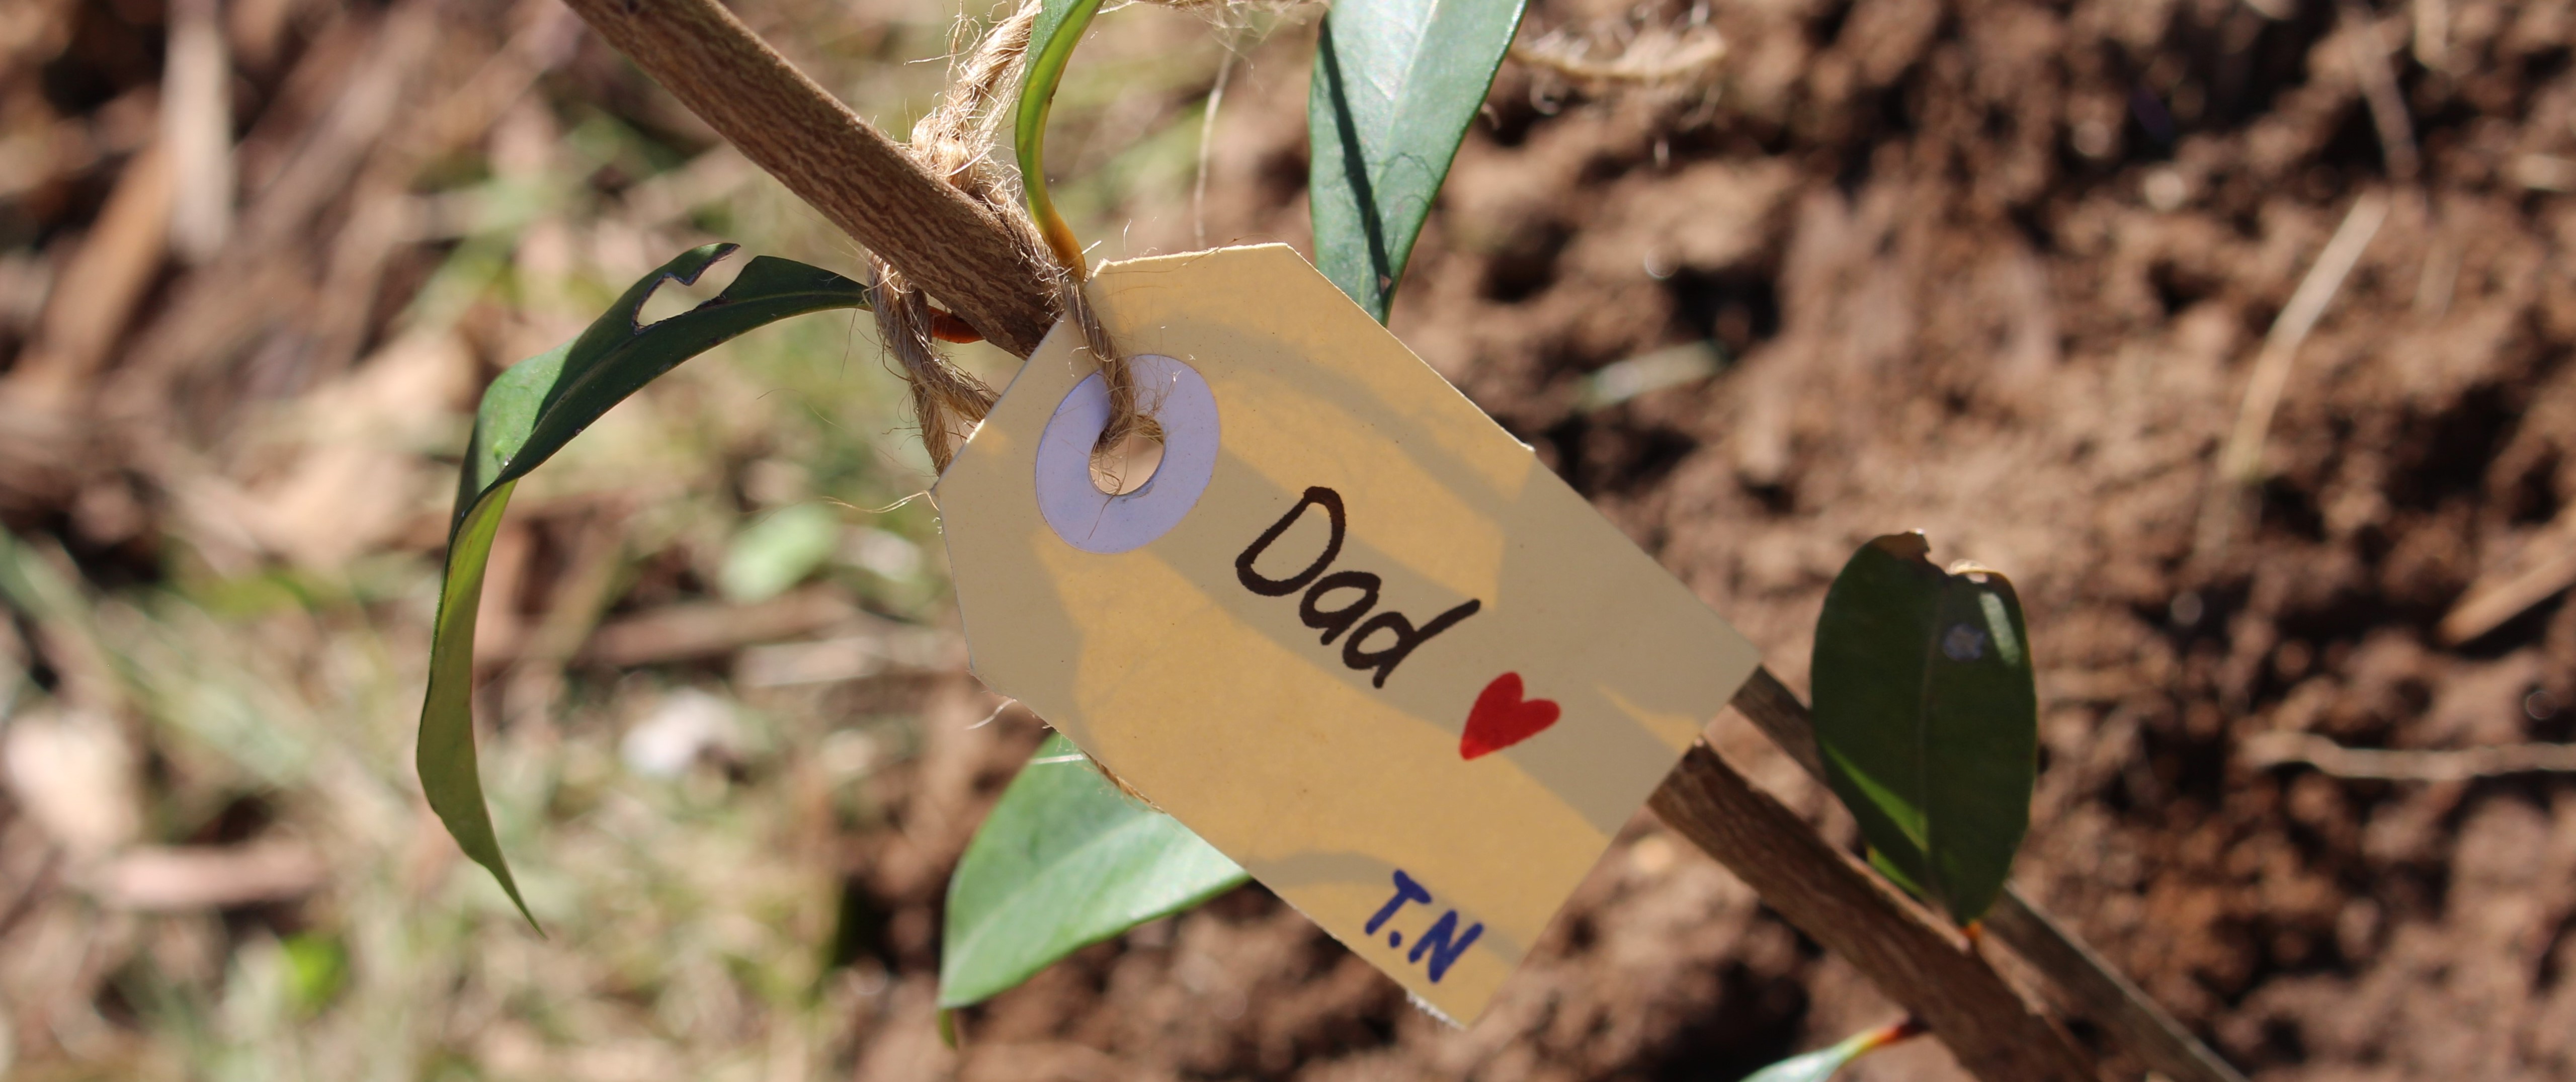 Small newly-planted tree with label saying 'Dad'